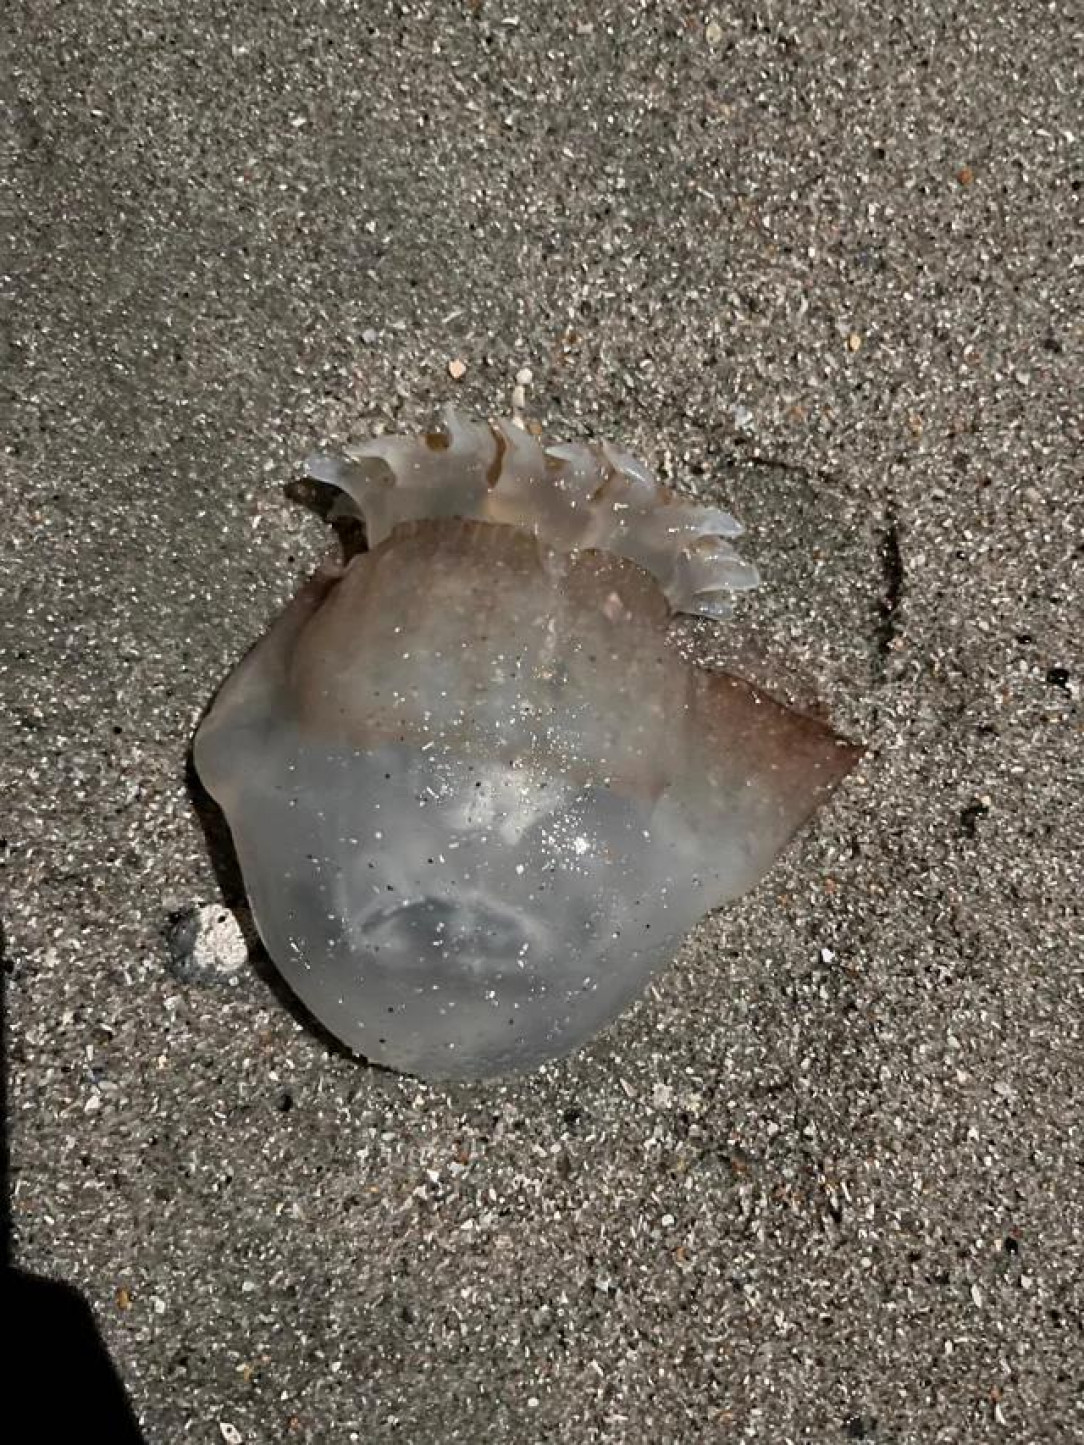 Can someone please tell me what this mysterious jellyfish look a like is?